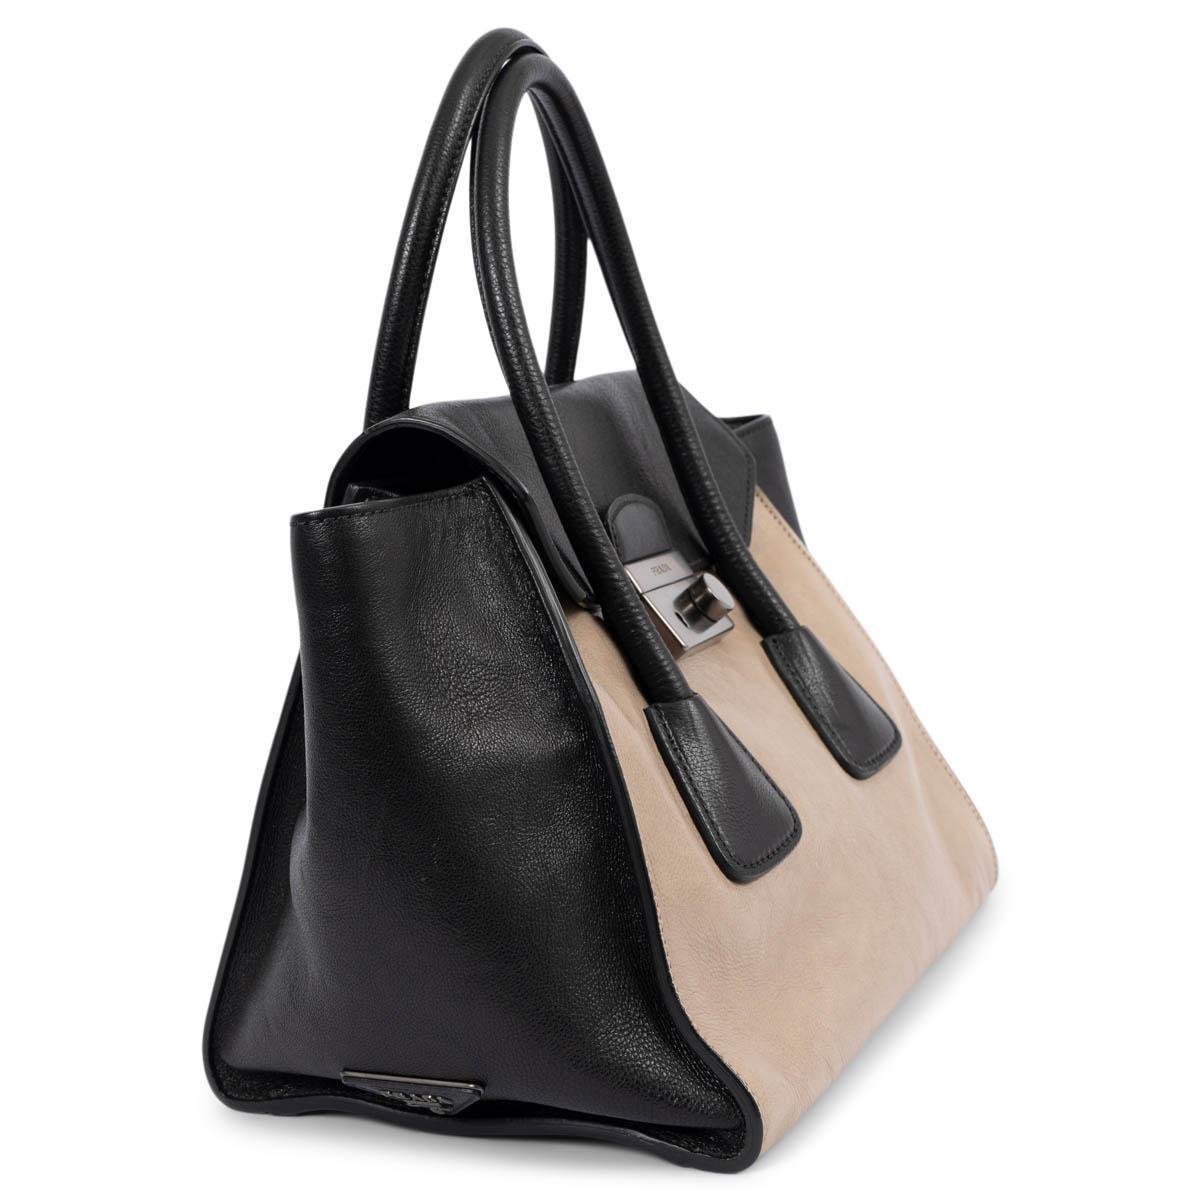 100% authentic Prada Sound tote in black and pomice beige Glace calfskin leather. Features a black detachable and adjustable shoulder strap, a front lock in sateen silver-tone with keys and clochette. Lined in black monogram nylon with an open and